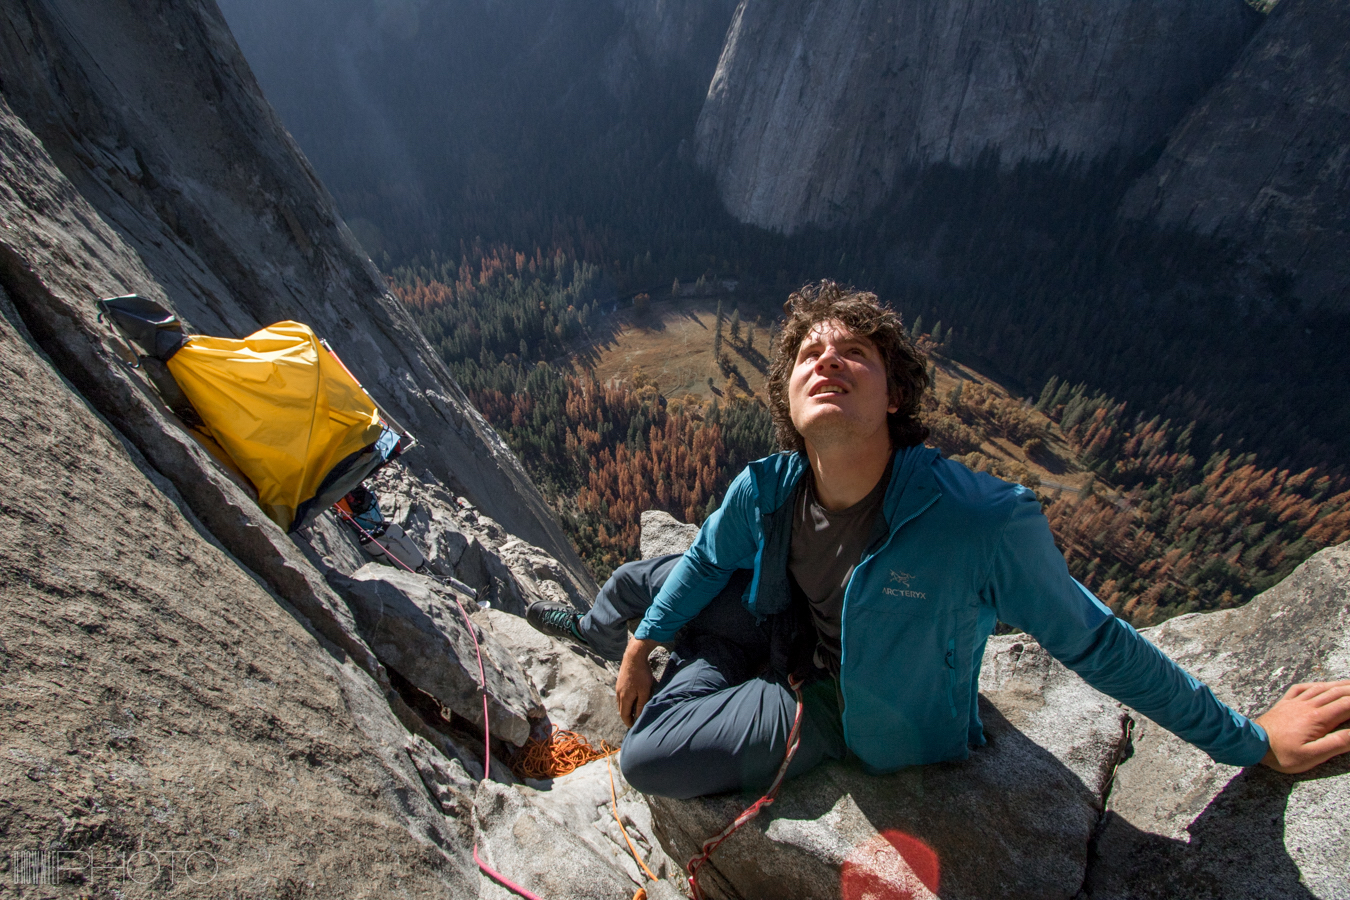 Marc-Andre Leclerc on a successful free ascent of El Capitan's Muir Wall (VI 5.13c 900m) with Brette Harrington and Alan Carney in 2015. [Photo] Bradford McArthur